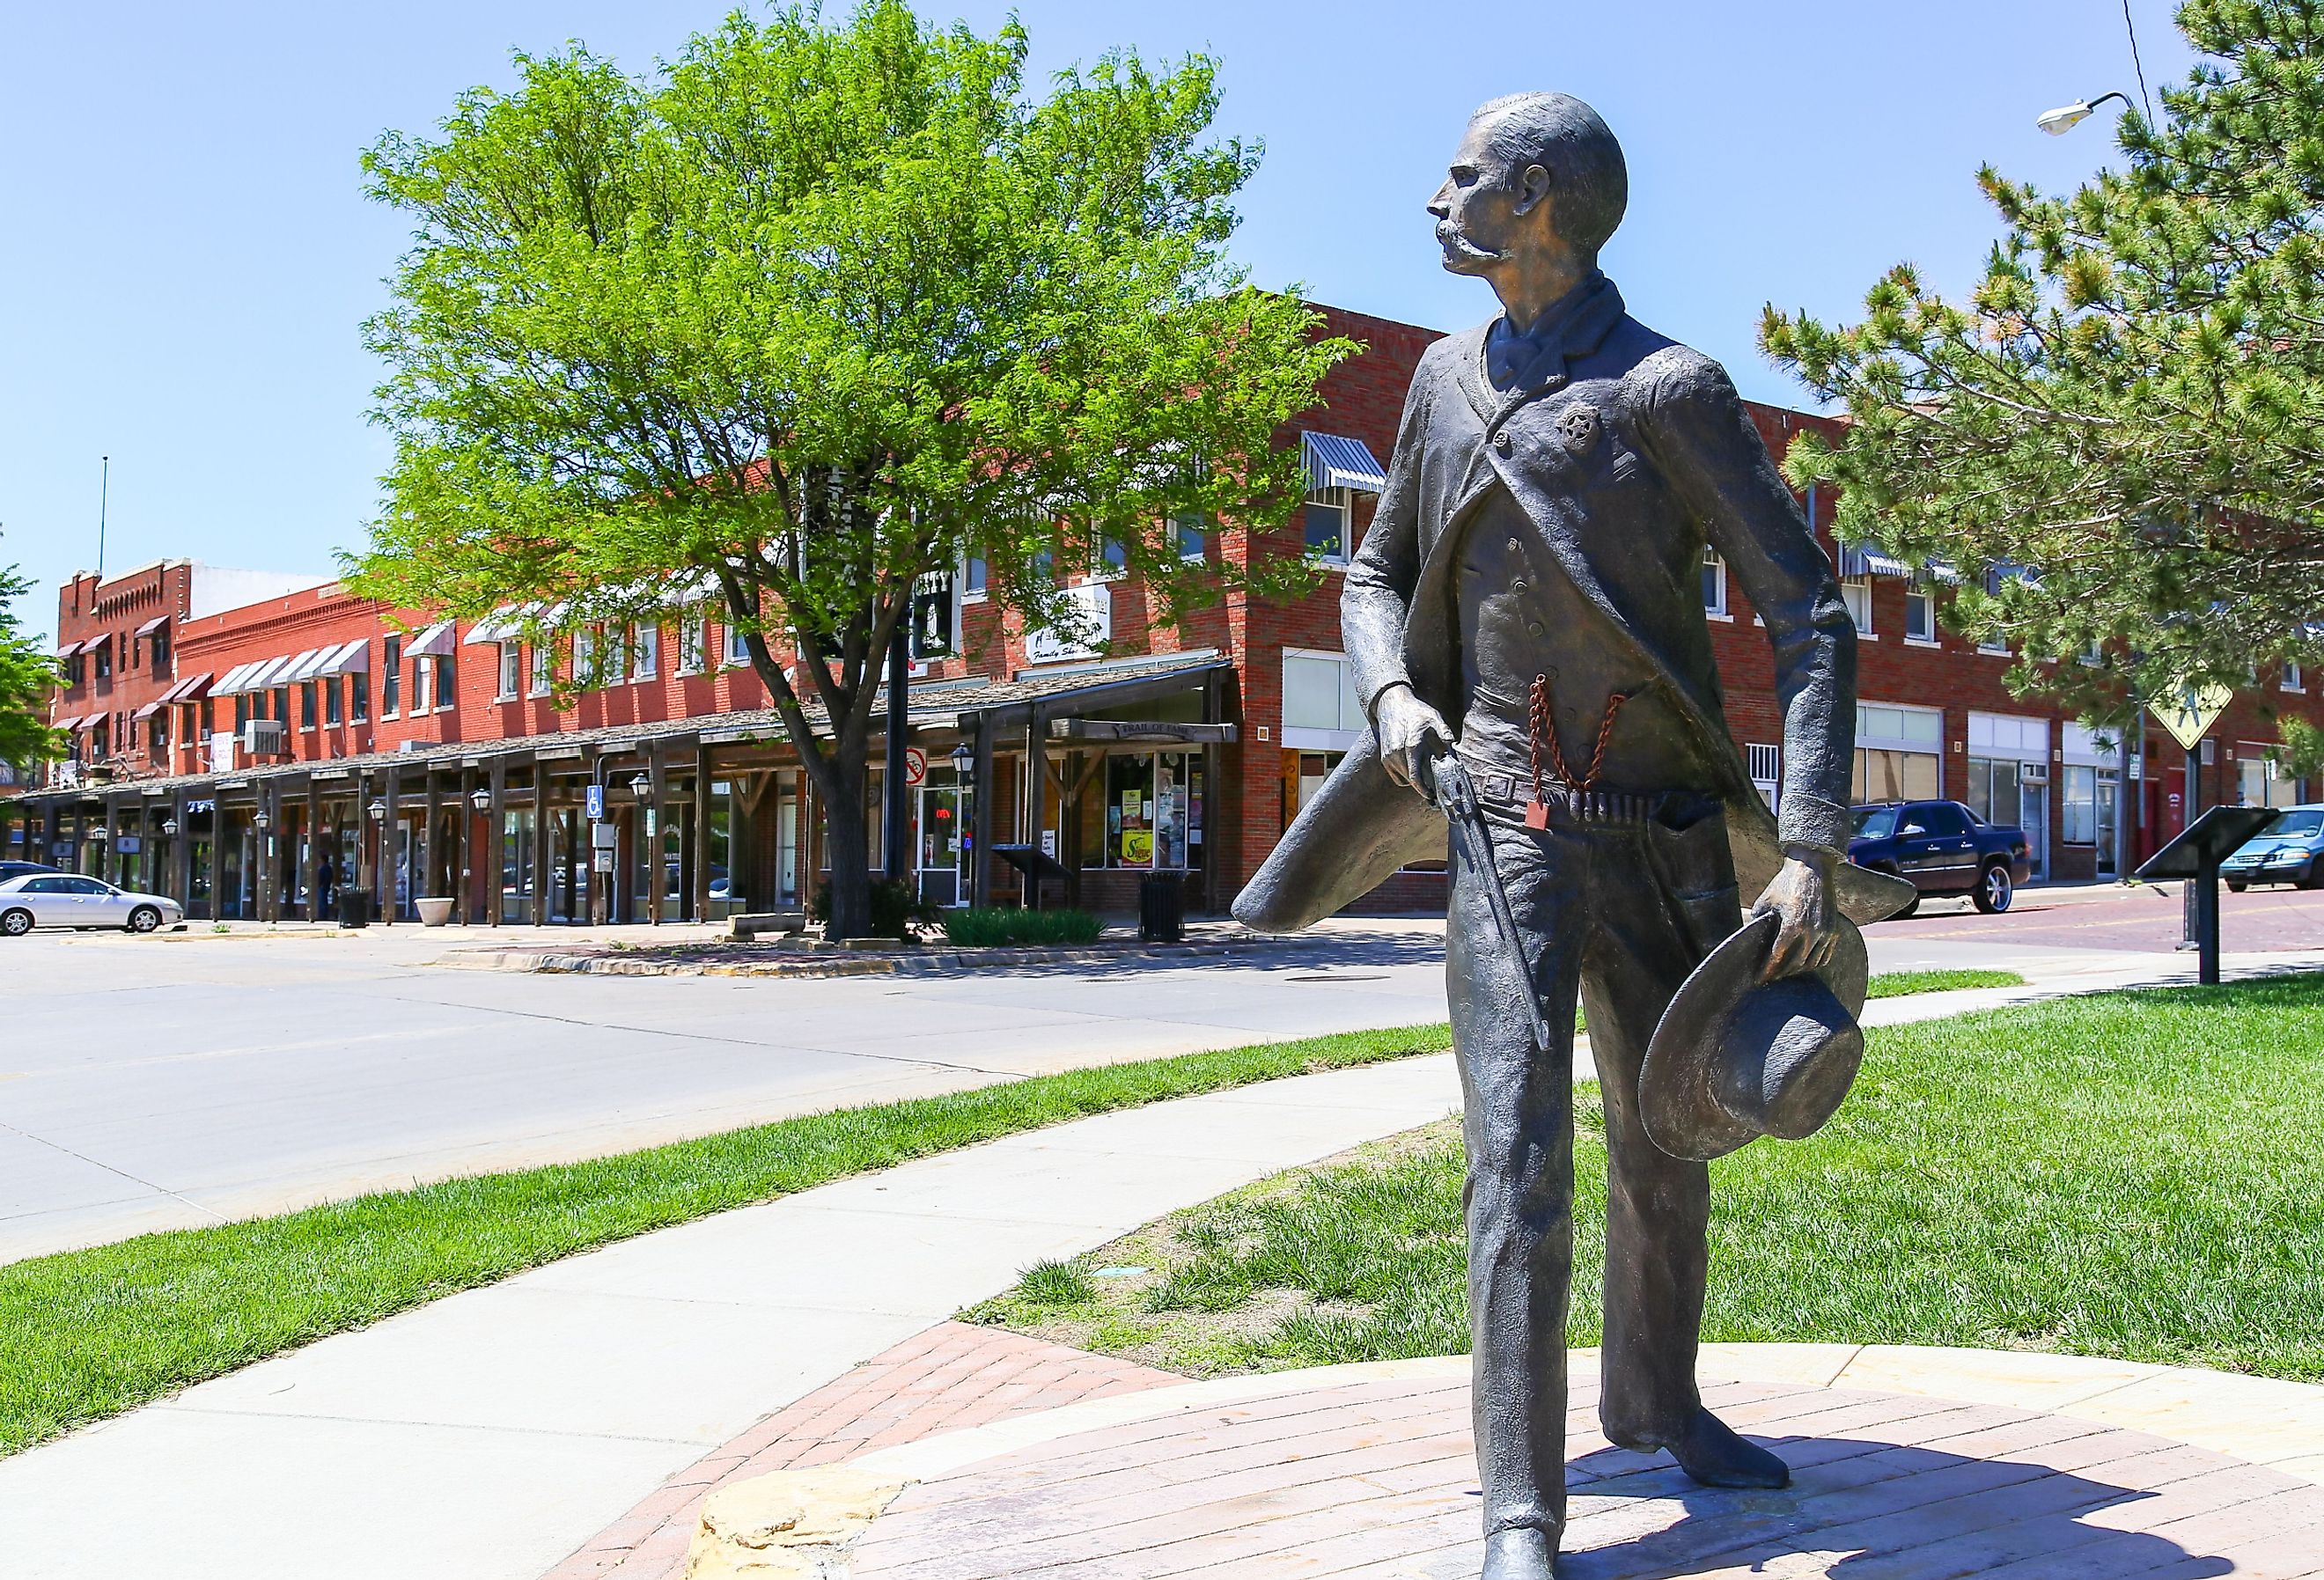 Bronze sculpture of Wyatt Earp as part of the Trail of Fame in the historic district of Dodge City, Kansas. Image credit Michael Rosebrock via Shutterstock